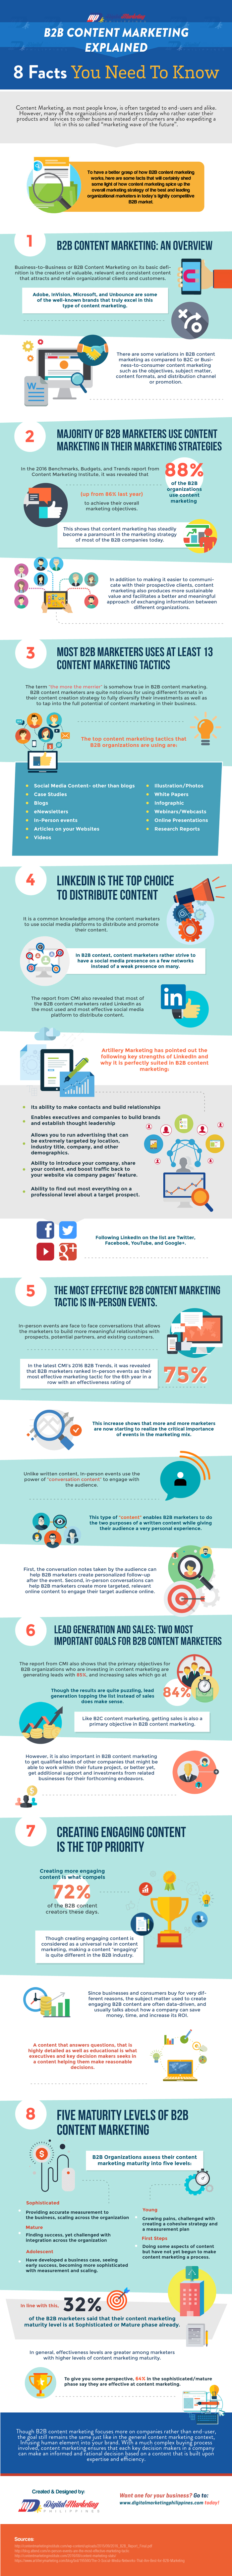 b2b-content-marketing-explained-8-facts-you-need-to-know